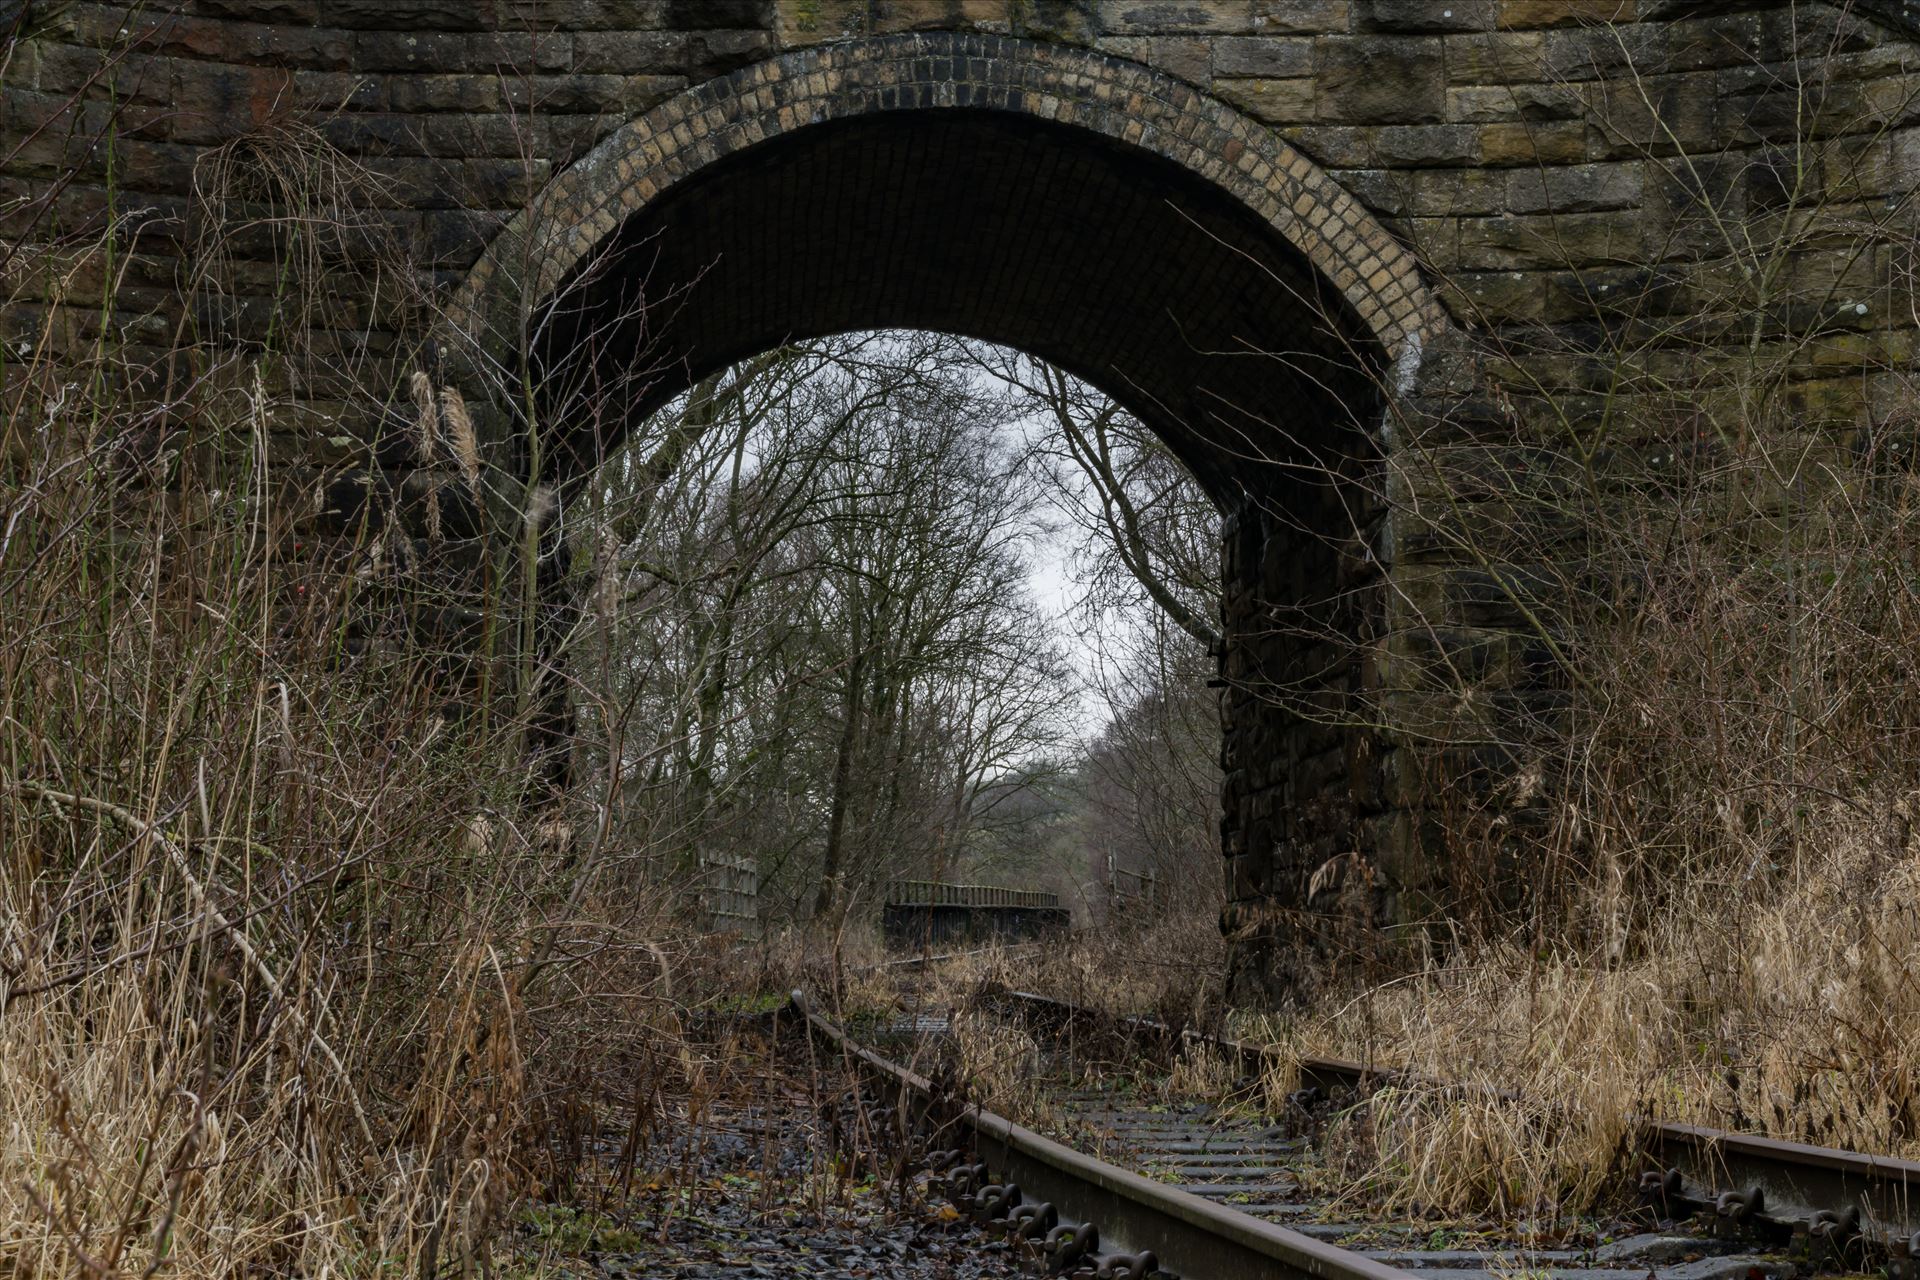 Abandoned Railway Bridge and Tunnel - Taken on 11/01/18 near Stanhope by AJ Stoves Photography